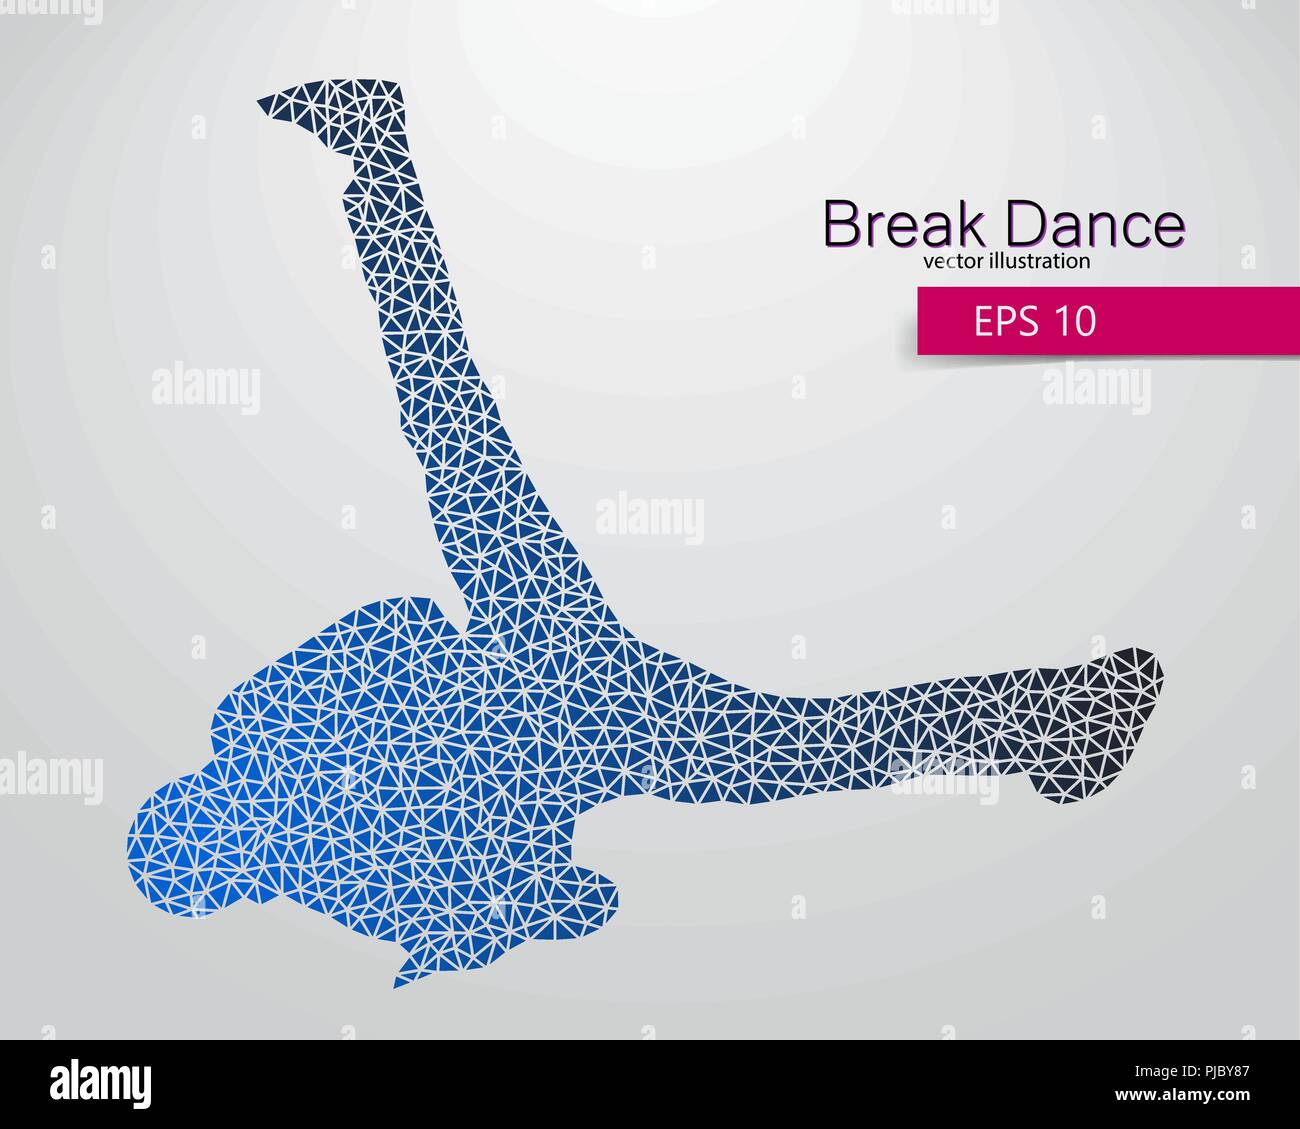 Silhouette of a break dancer from triangles. Background and text on a separate layer, color can be changed in one click. Stock Vector